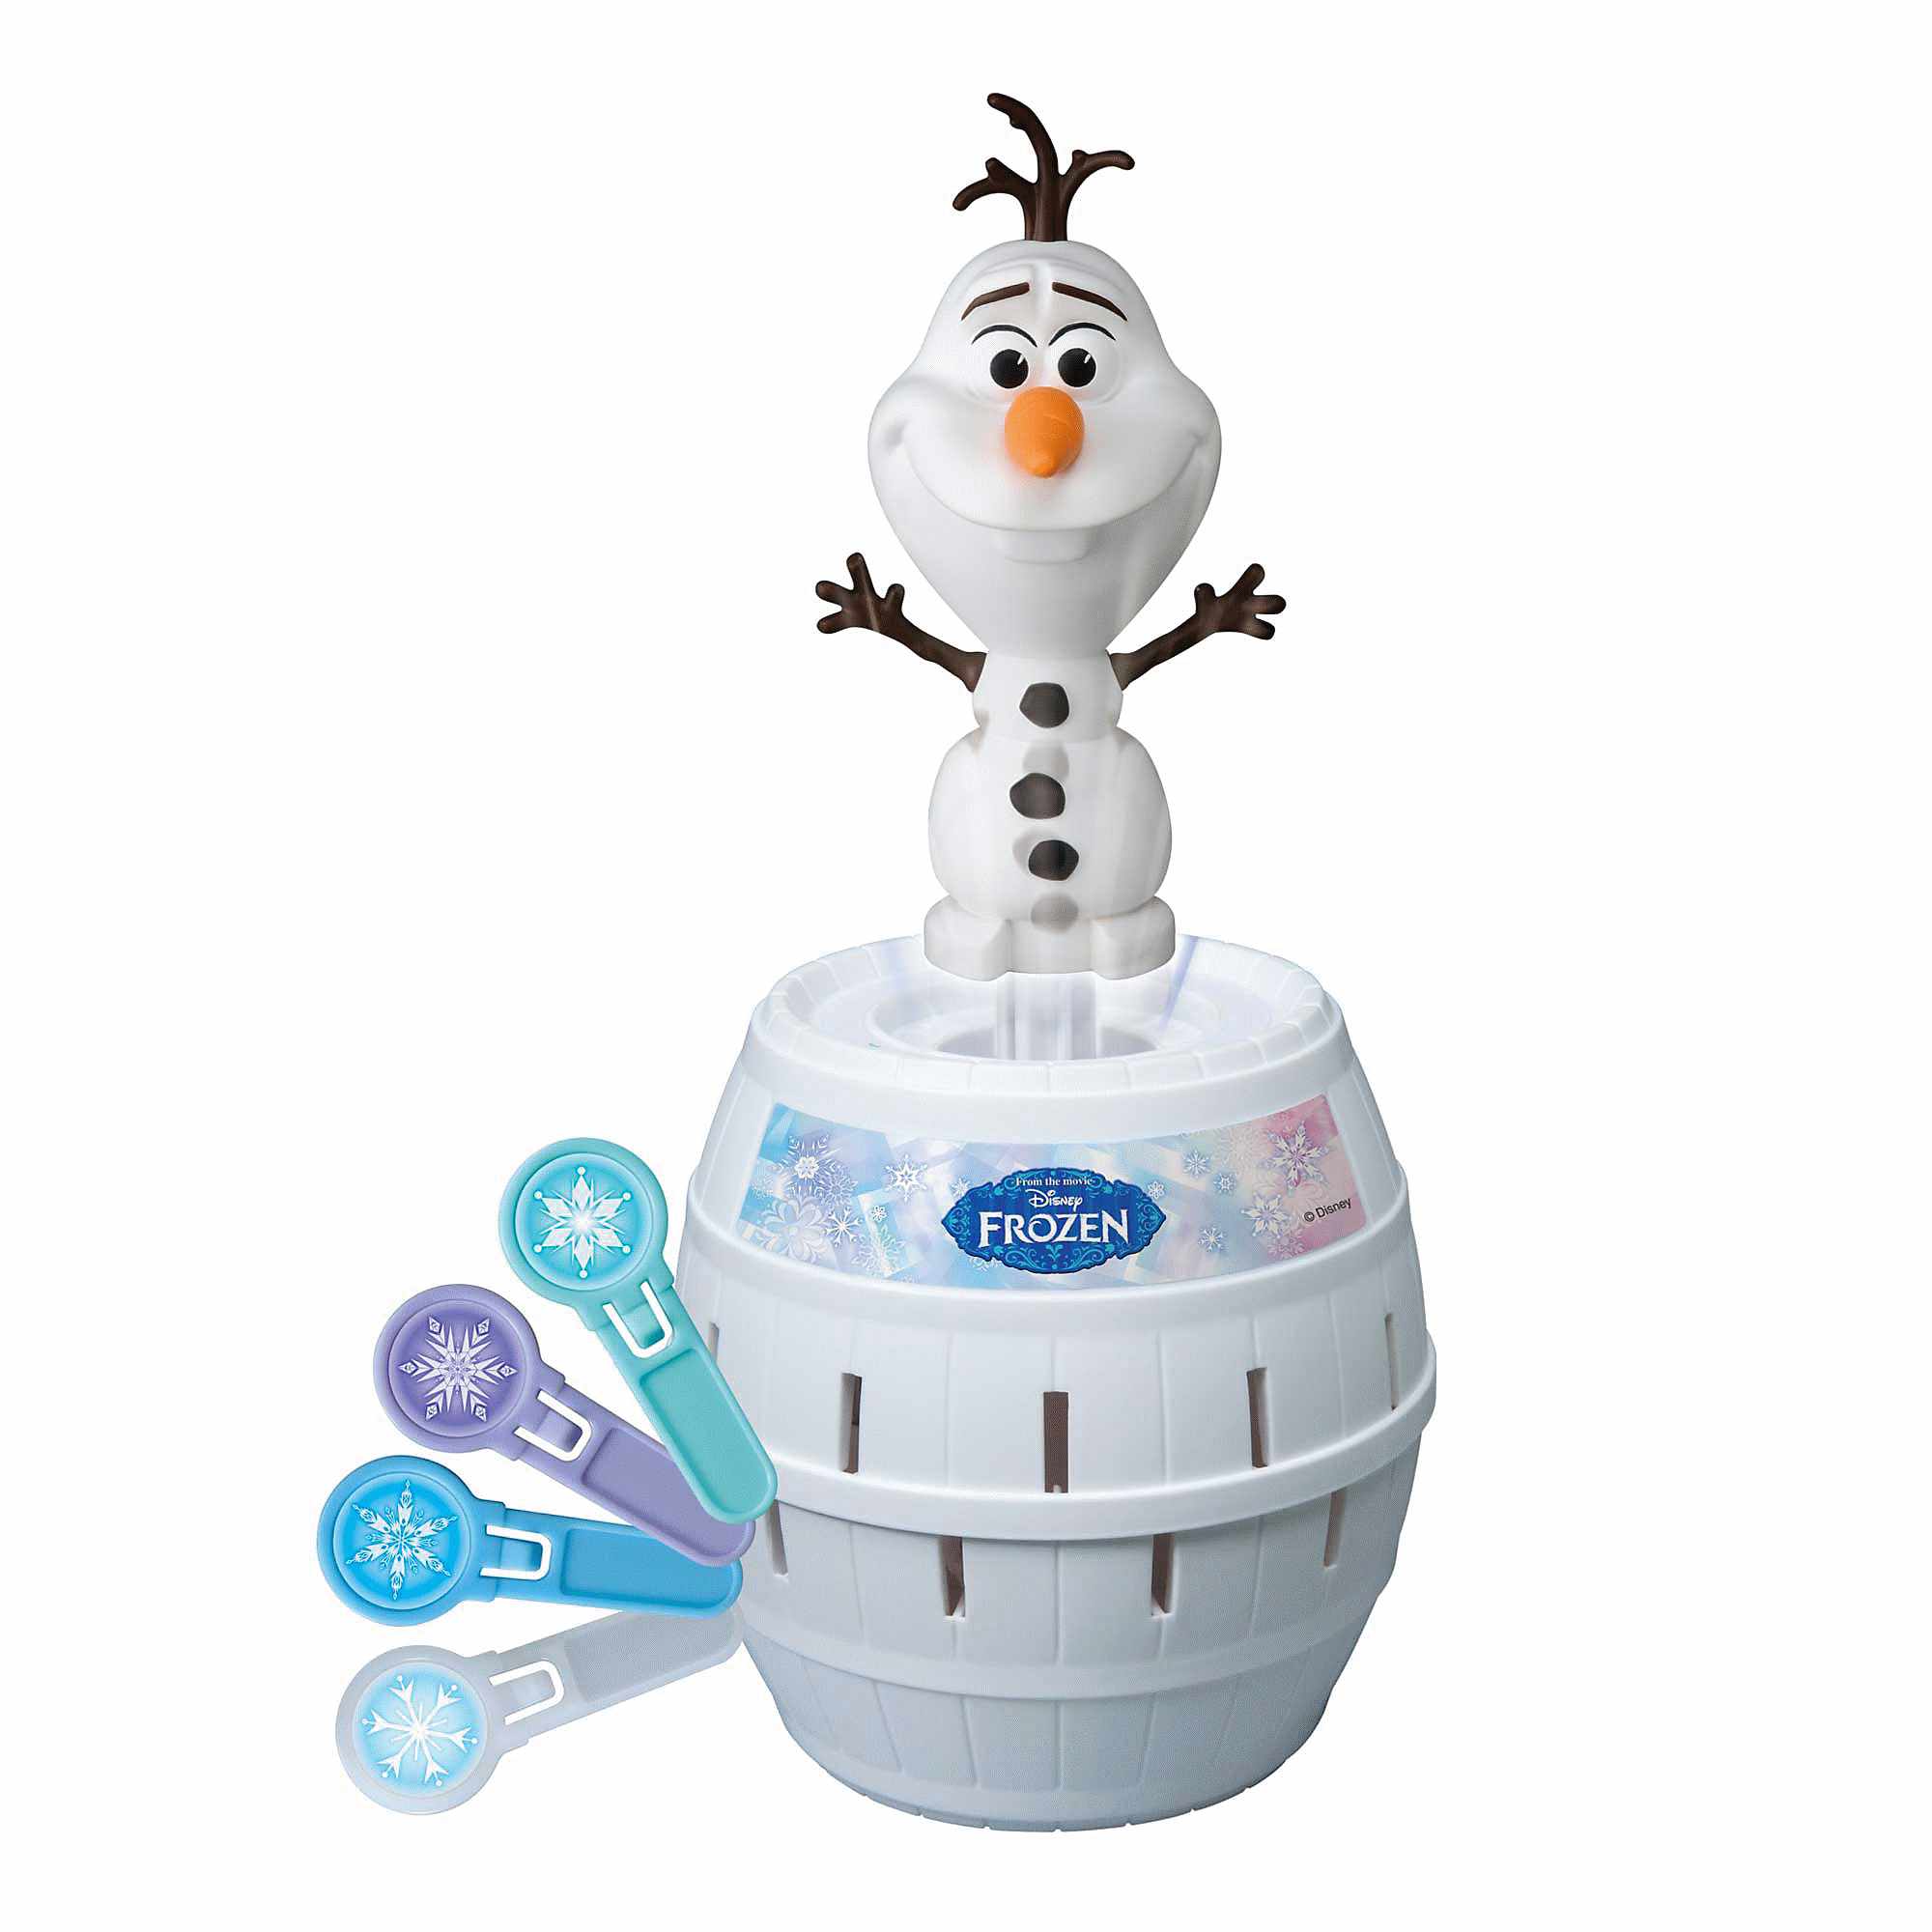 TOMY Pop-Up Olaf Commercial 